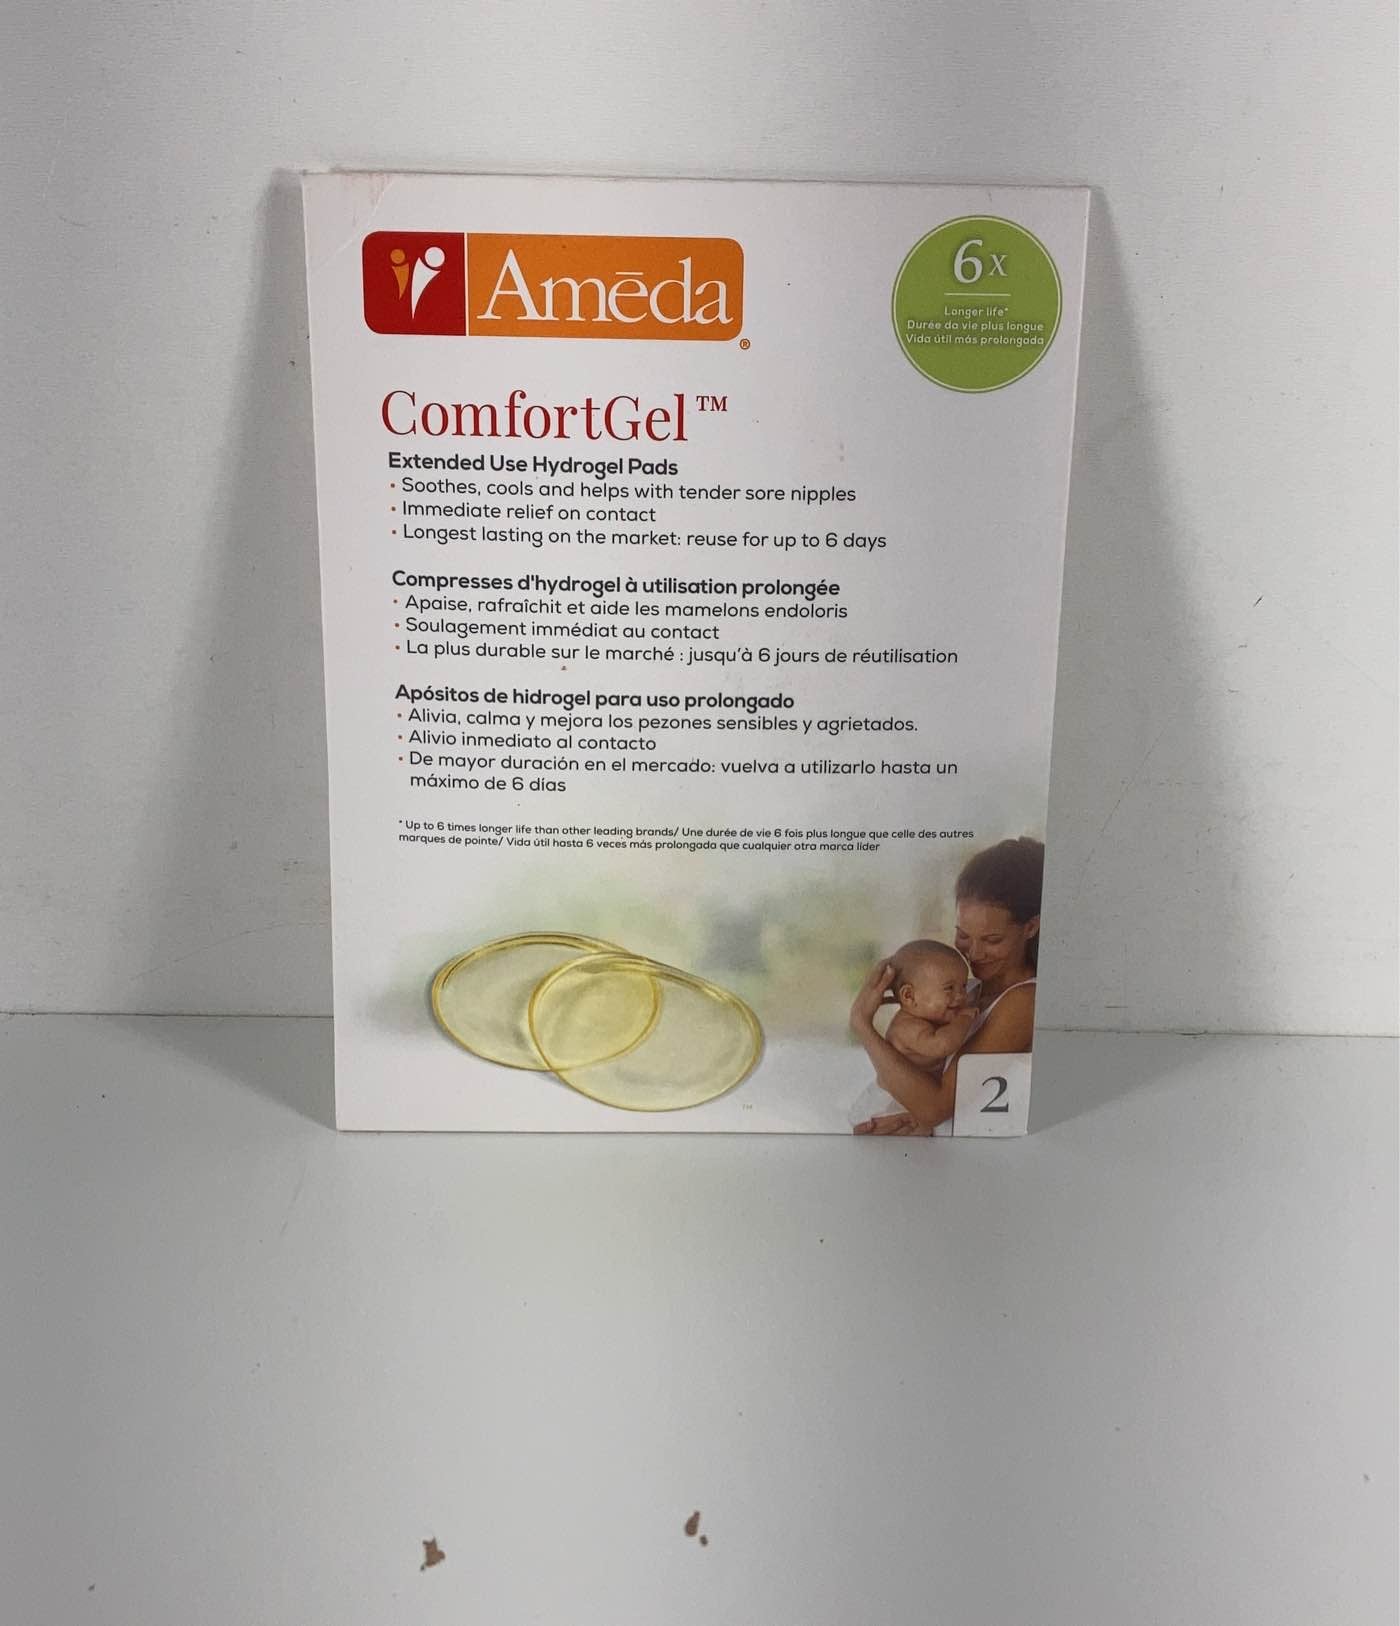 Ameda Extended-Use Hydrogel pads help provide soothing, cooling